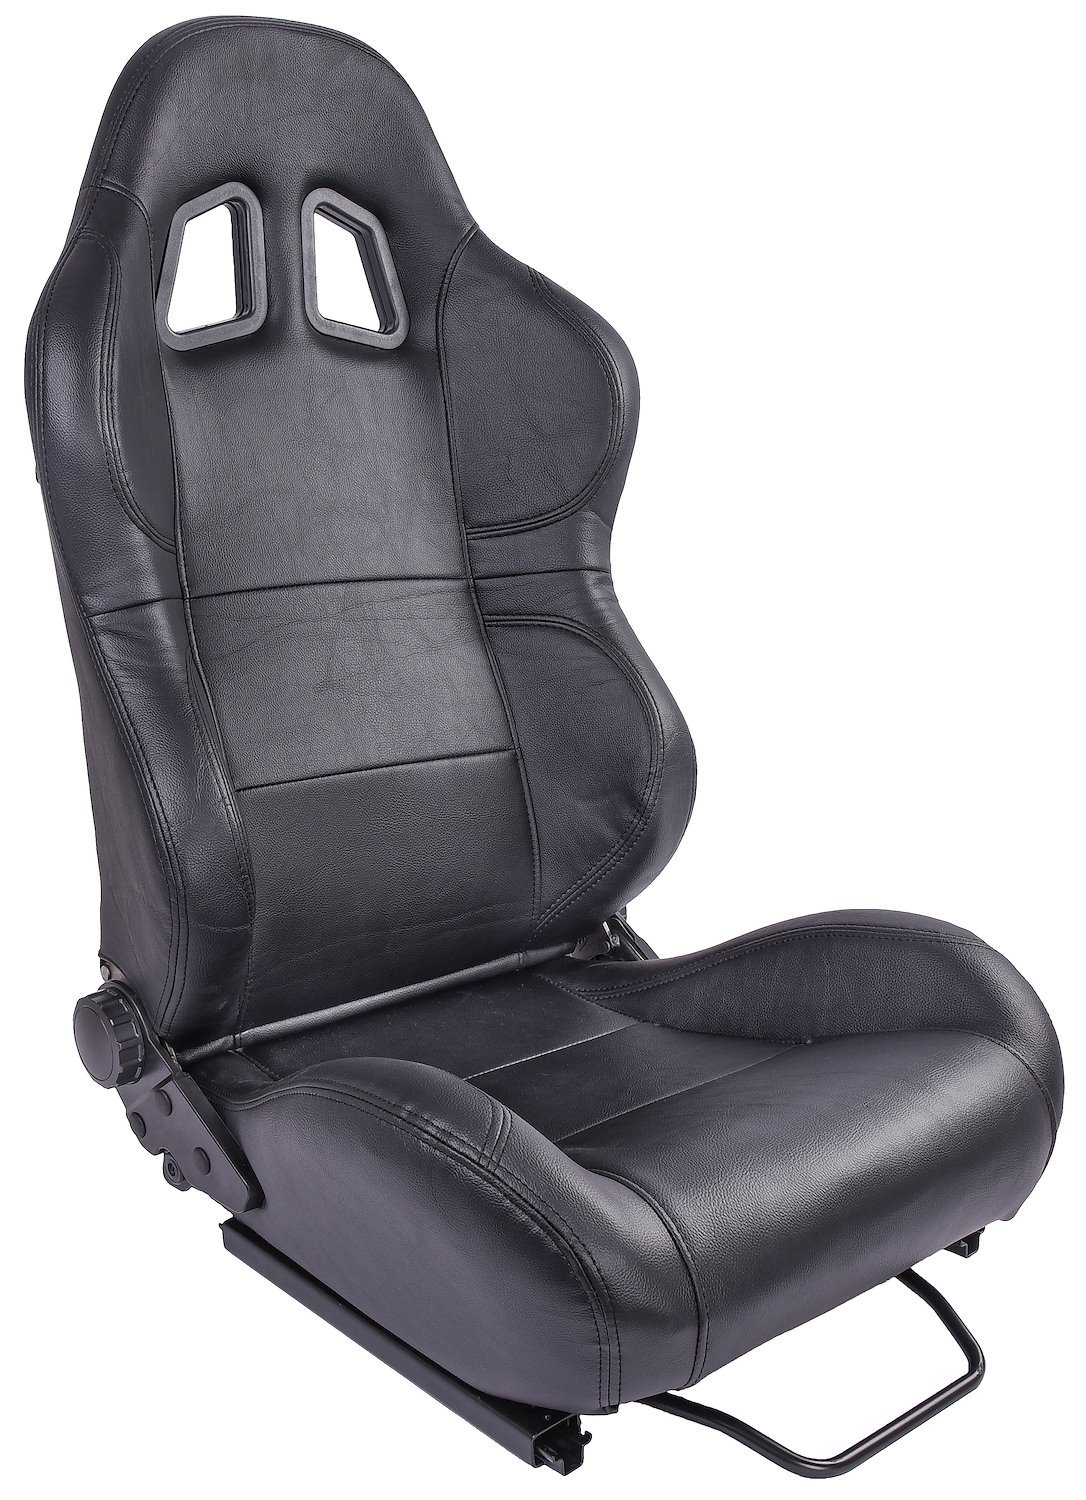 GS-1 High Back Sport Seat, Driver or Passenger